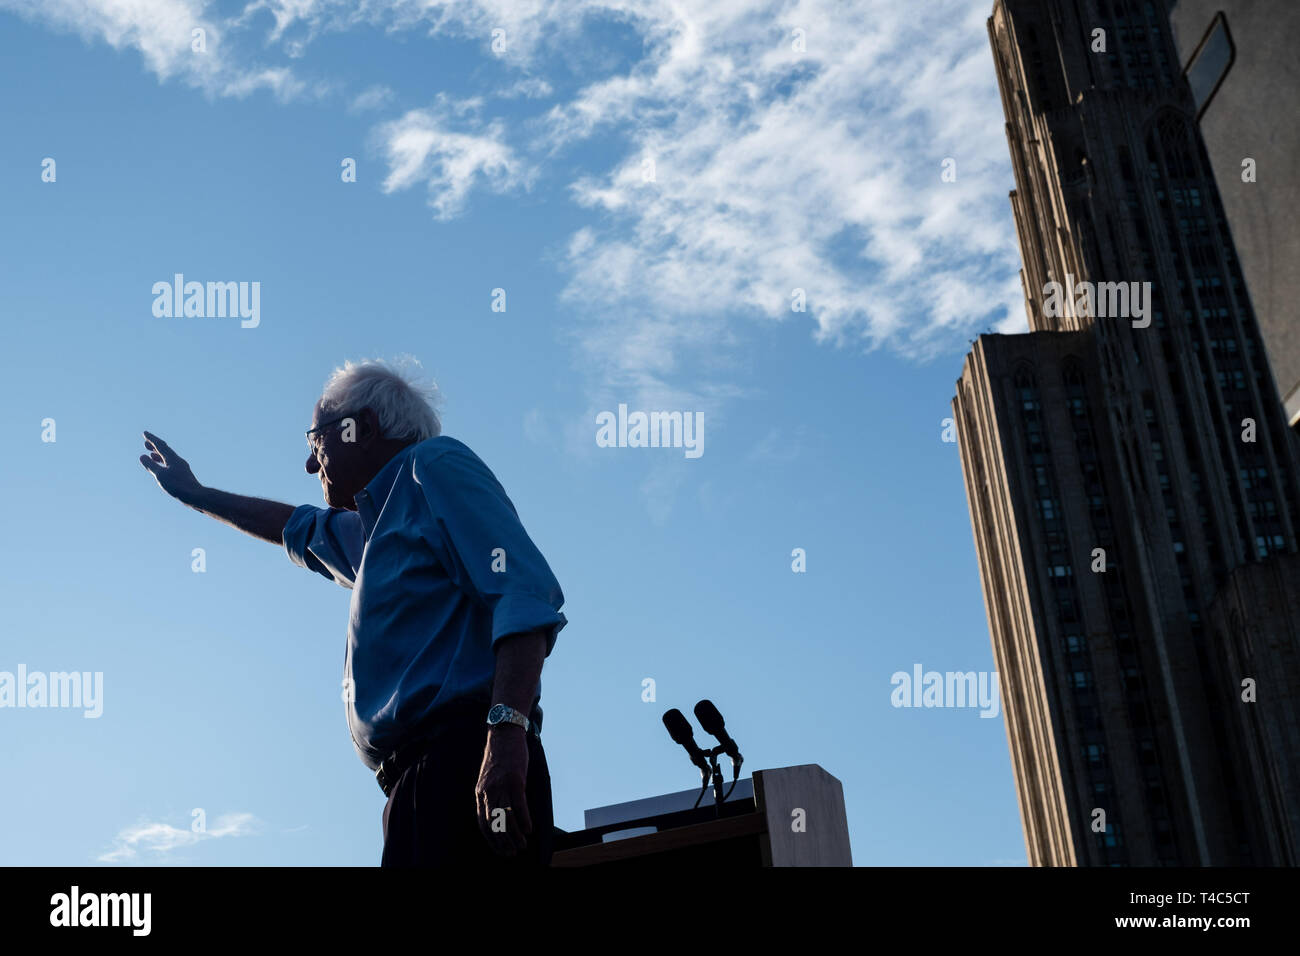 Bernie Sanders greets the crowd during his rally campaign ahead of United States Presidential election. Democratic Presidential candidate Bernie Sanders rally in Pittsburgh, PA on the campaign trail for the bid in the 2020 election. Stock Photo